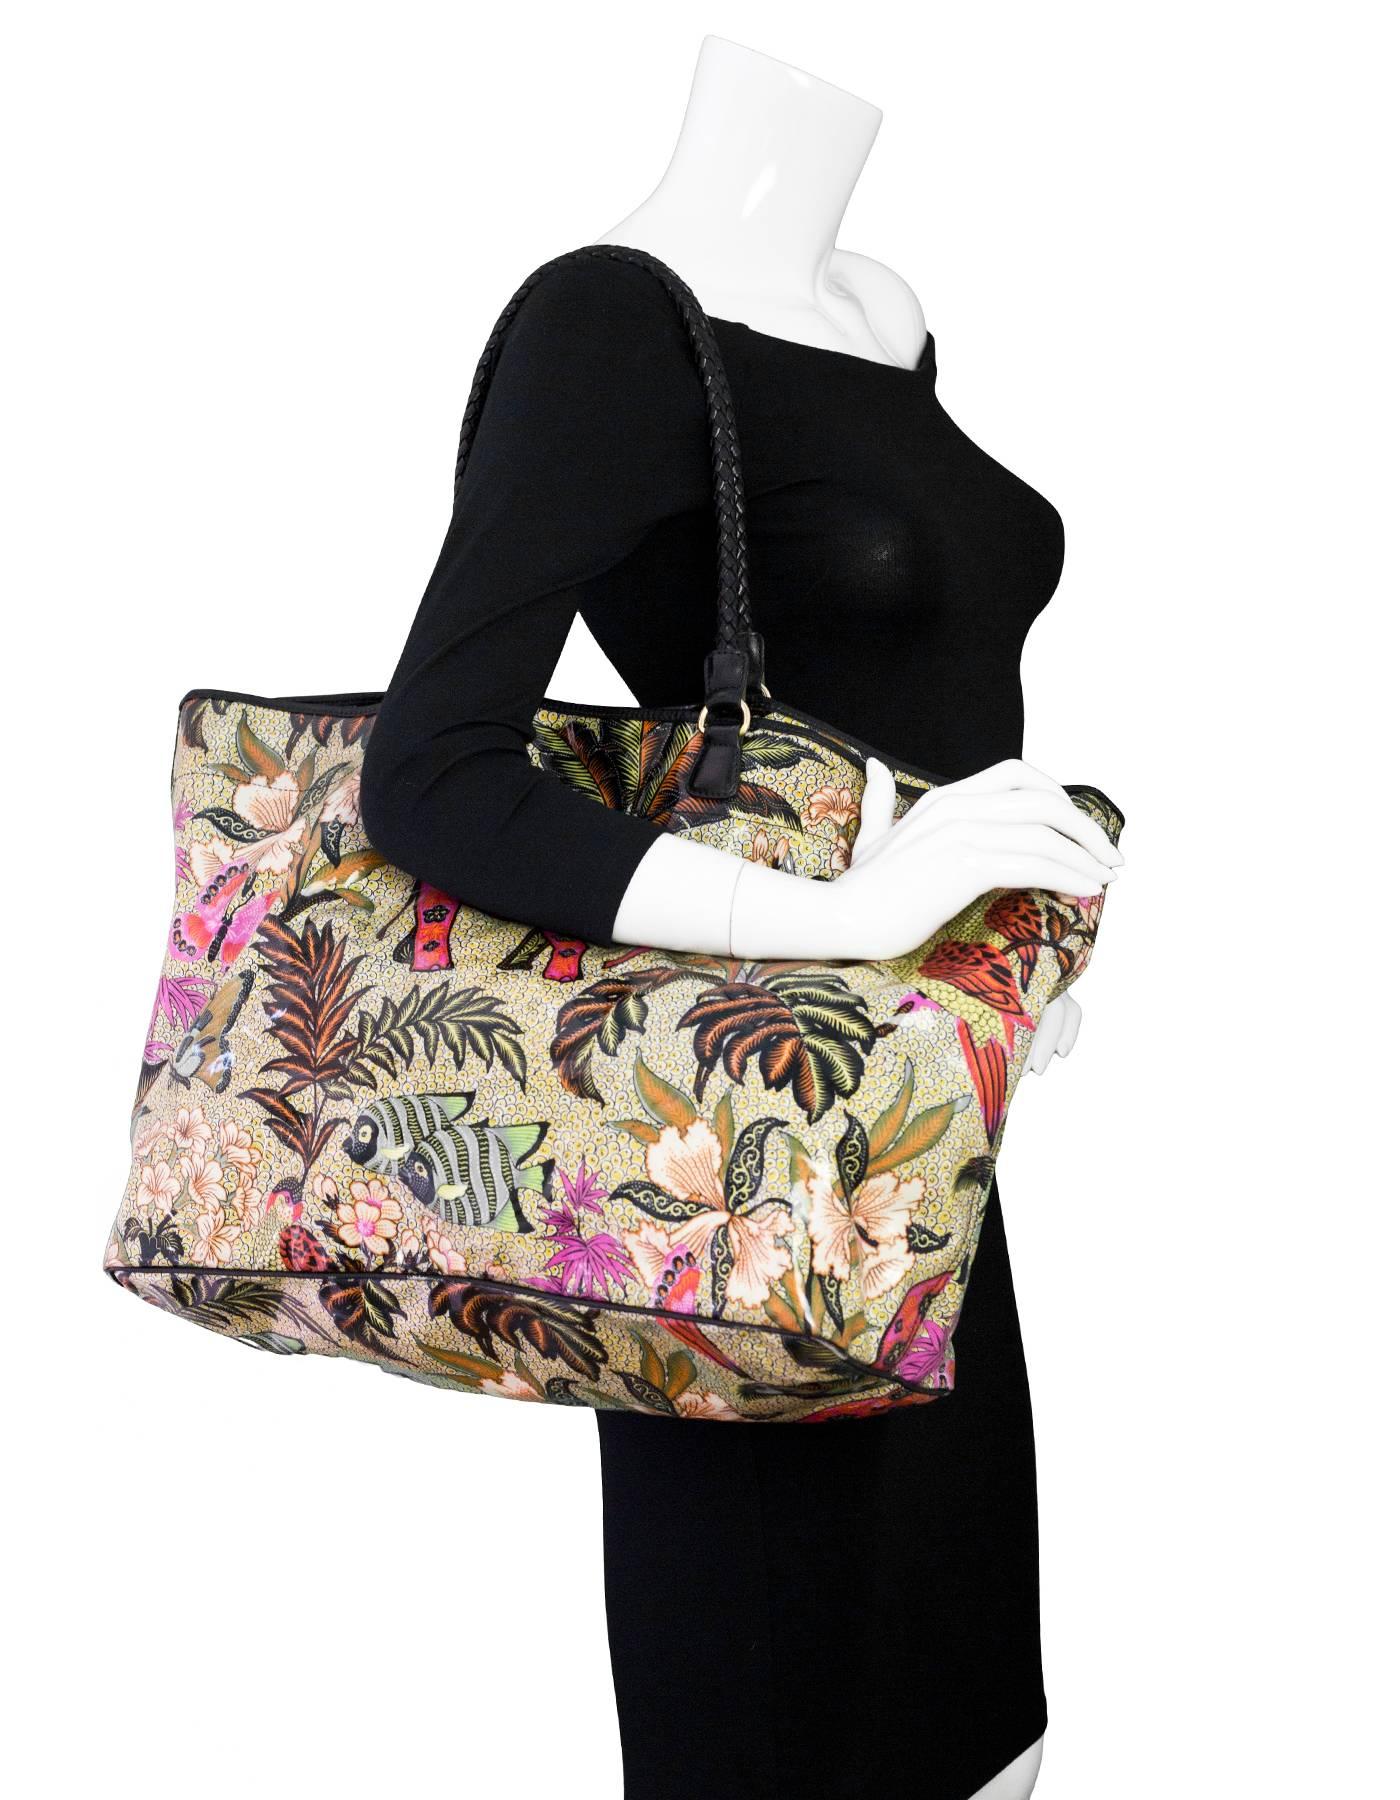 Etro Jungle Print PVC Beach Tote

Made In: Italy
Color: Multi
Materials: PVC, Leather
Lining: Thin canvas
Closure/Opening: Open top with center snap button
Exterior Pockets: None
Interior Pockets: attached zip pochette
Overall Condition: Excellent